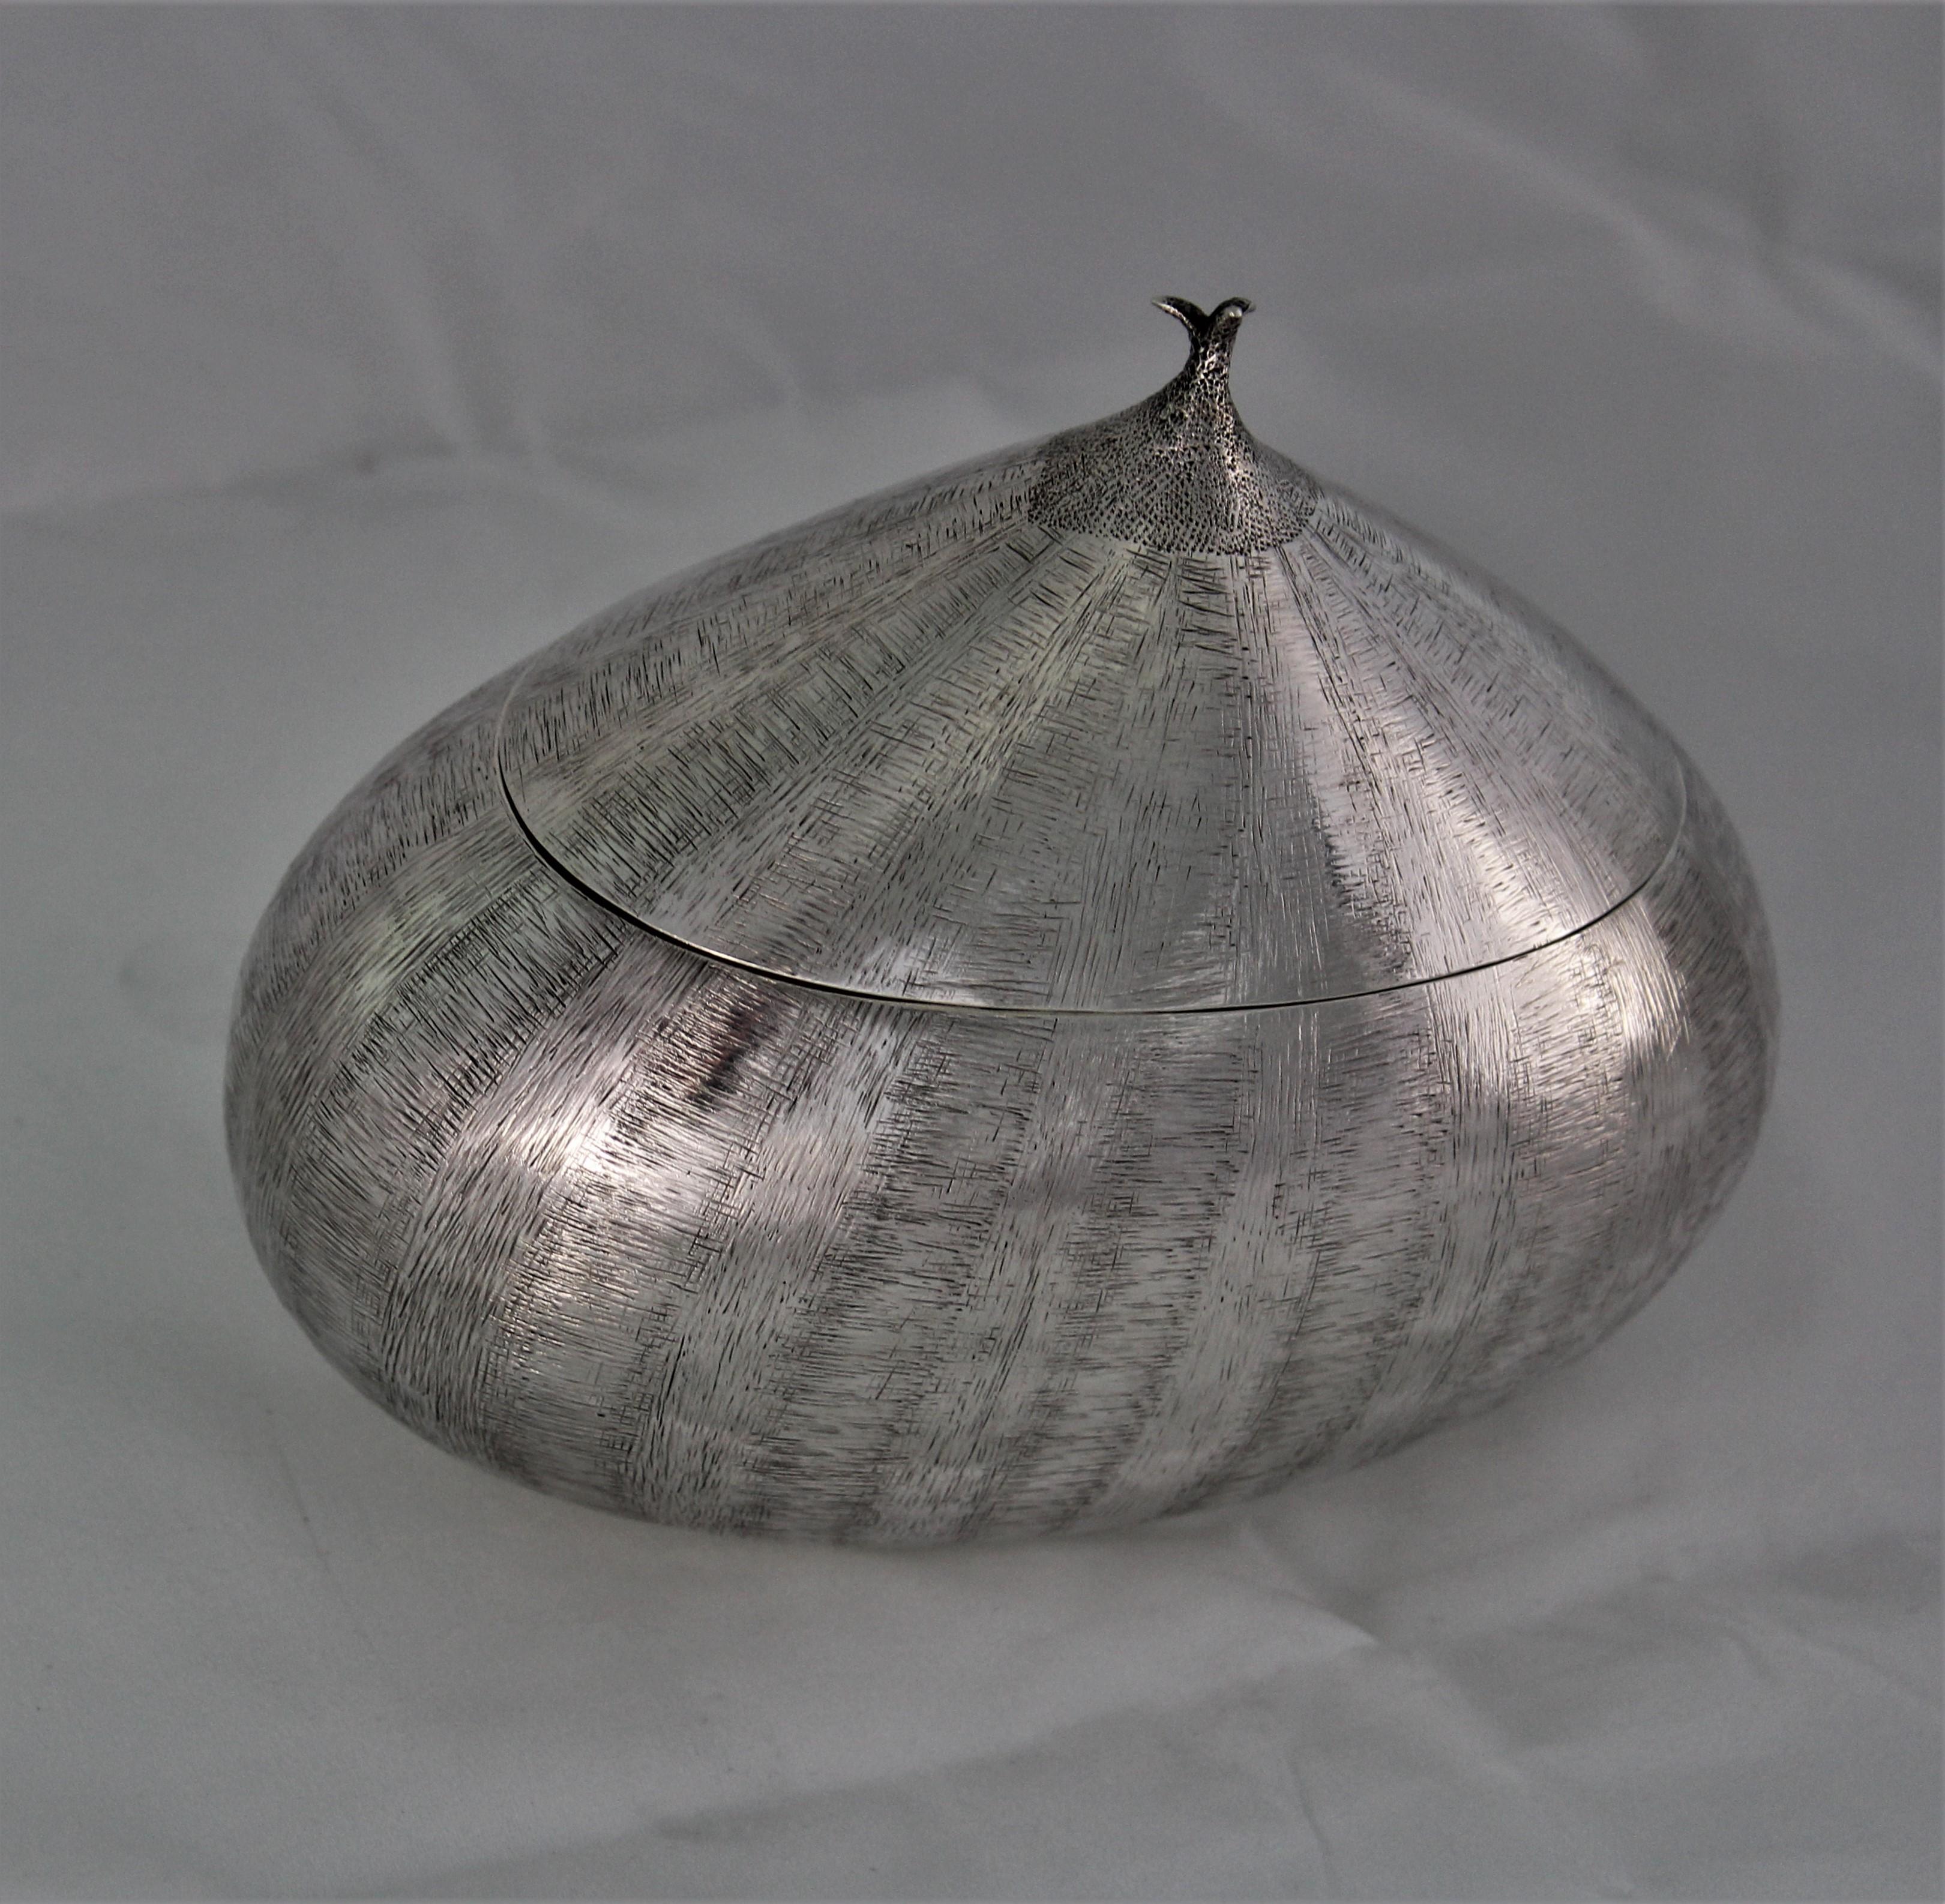 Italian 20th Century Mario Buccellati Sterling Silver Engraved Chestnut Bowl, 1950s For Sale